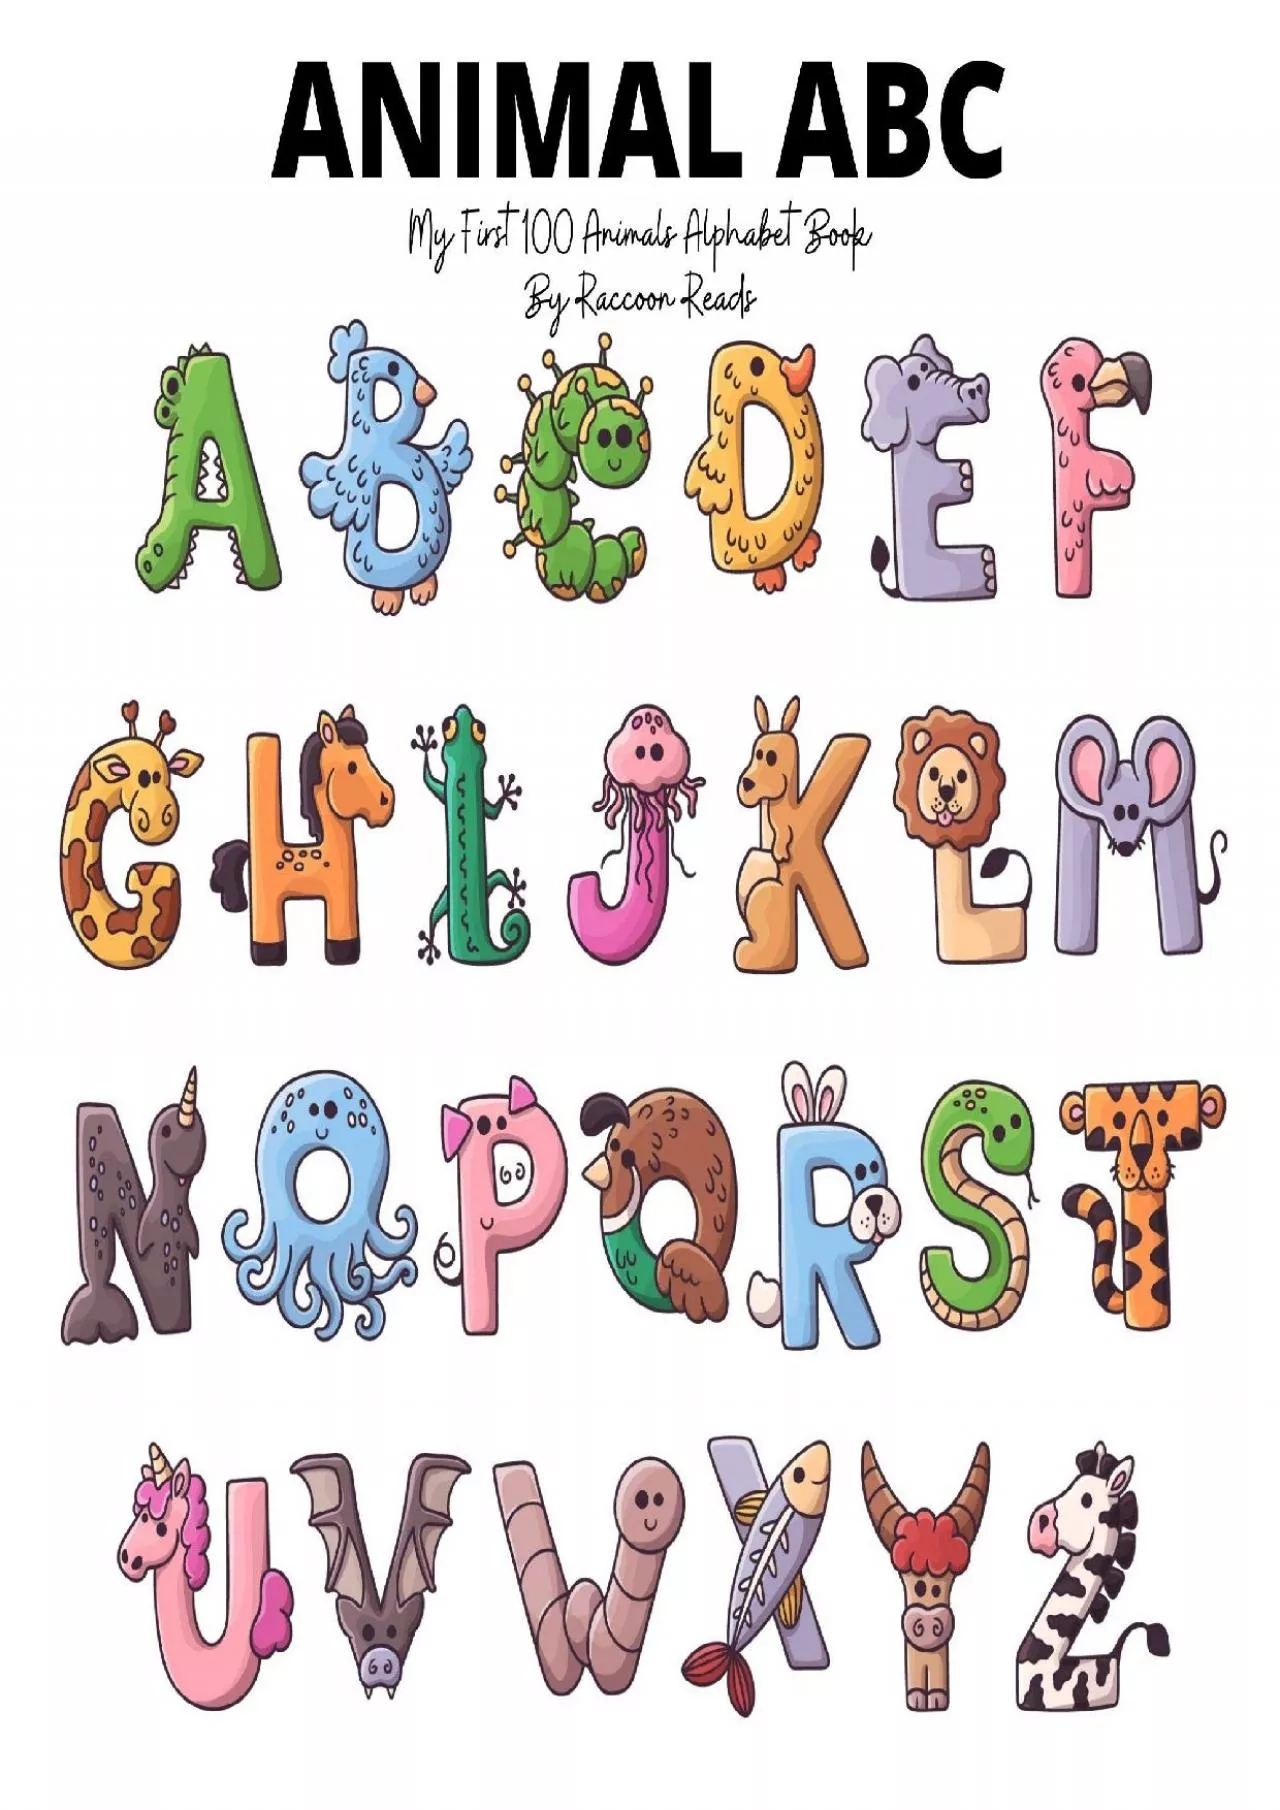 [DOWNLOAD] My First 100 Animals Alphabet Book: Animal ABC Book - Learn to Read With Letters